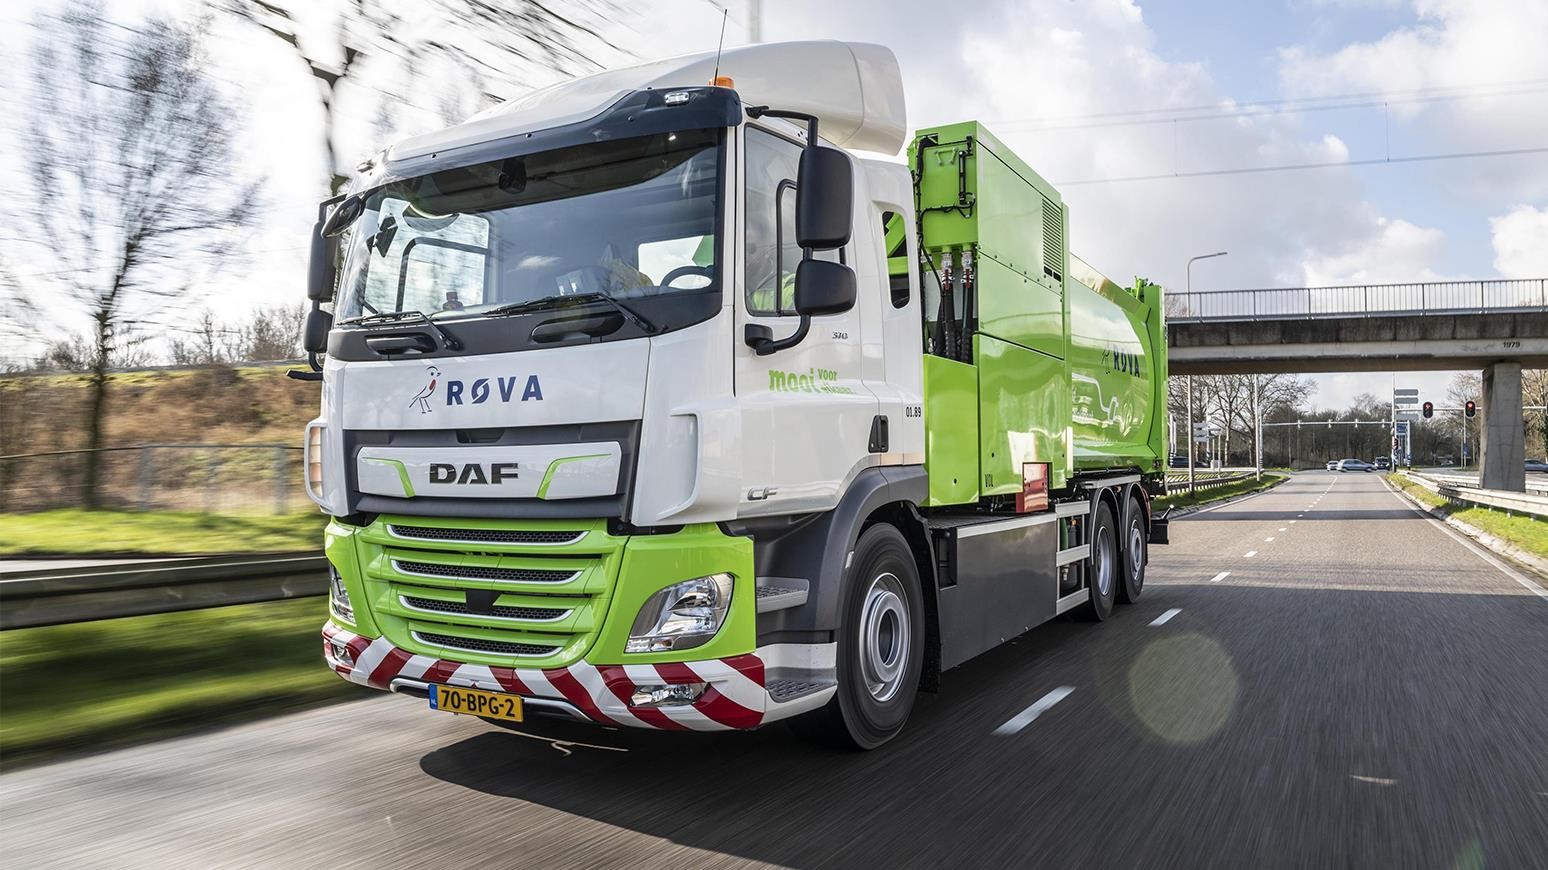 DAF Delivers Its First CF Electric 6x2 Refuse Truck To Dutch Waste Management Specialist ROVA